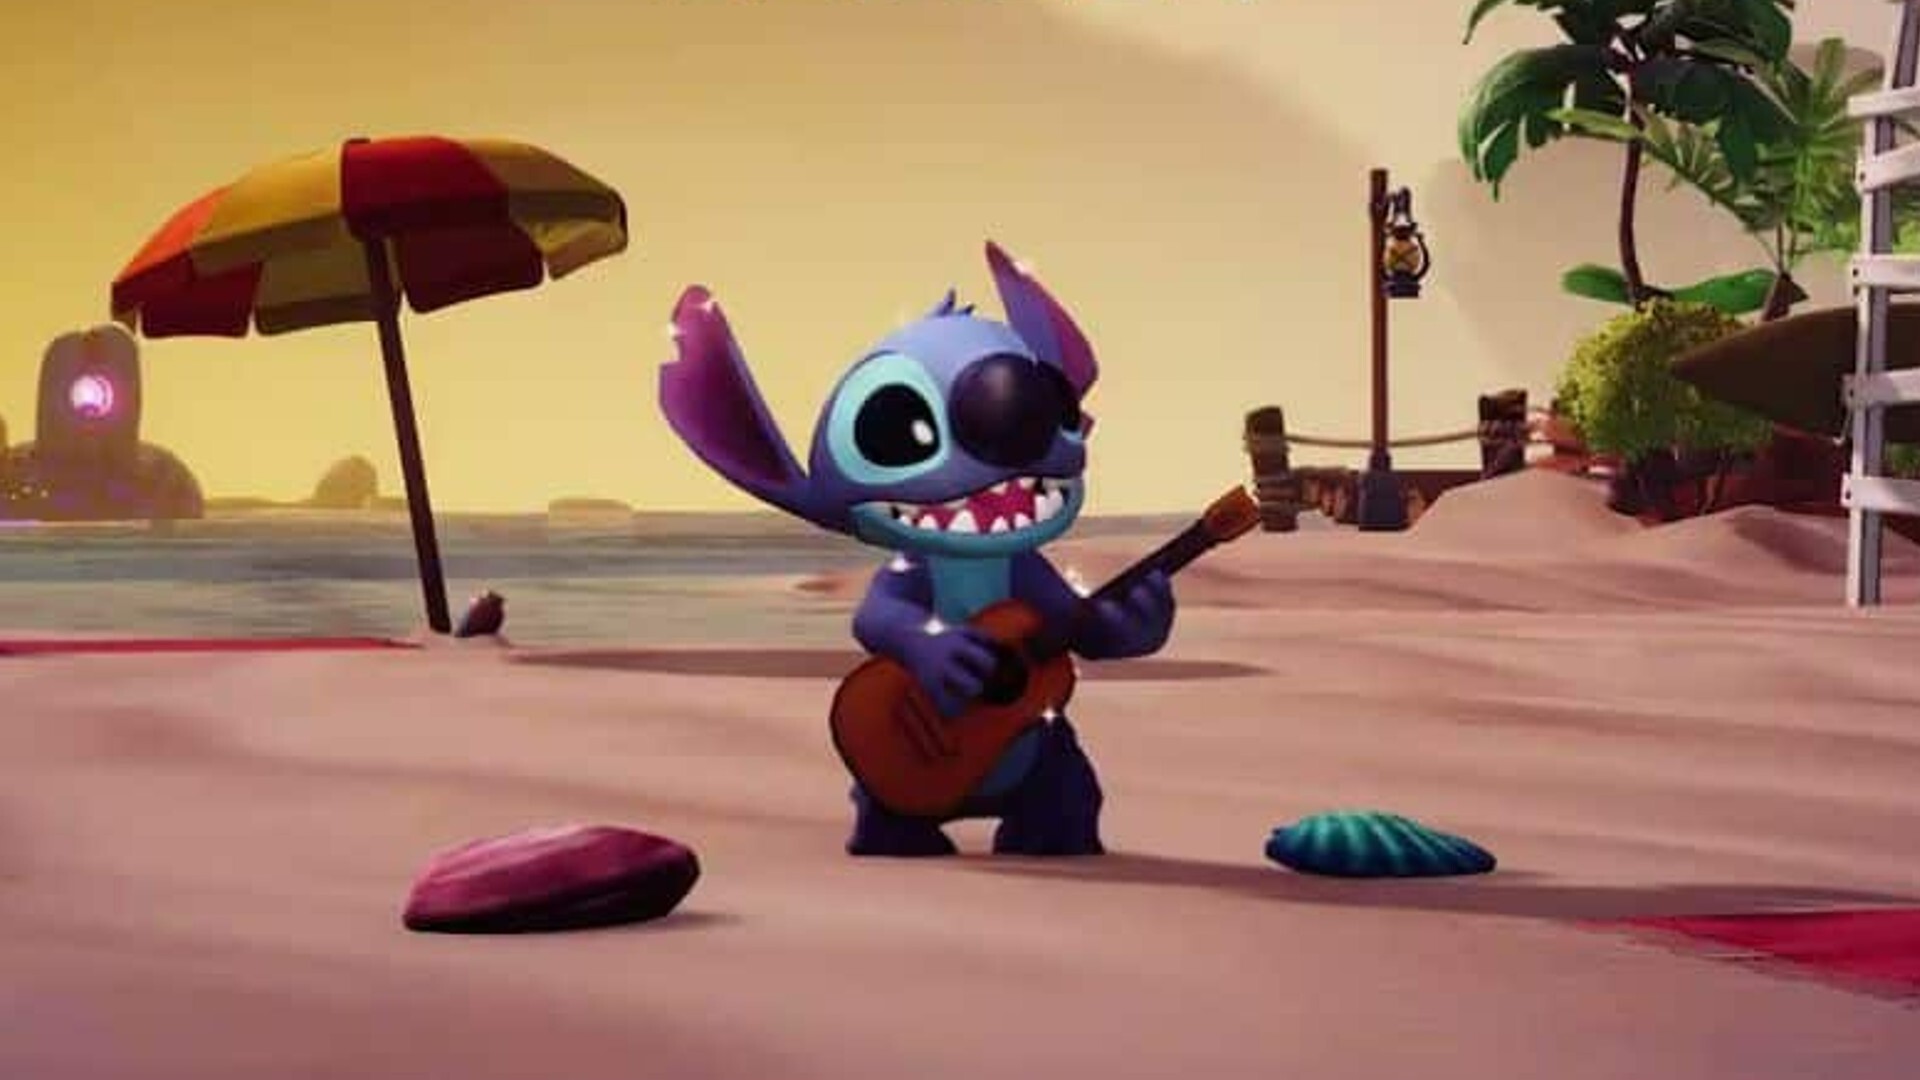 Disney Dreamlight Valley Toy Story update adds surprise guest Stitch